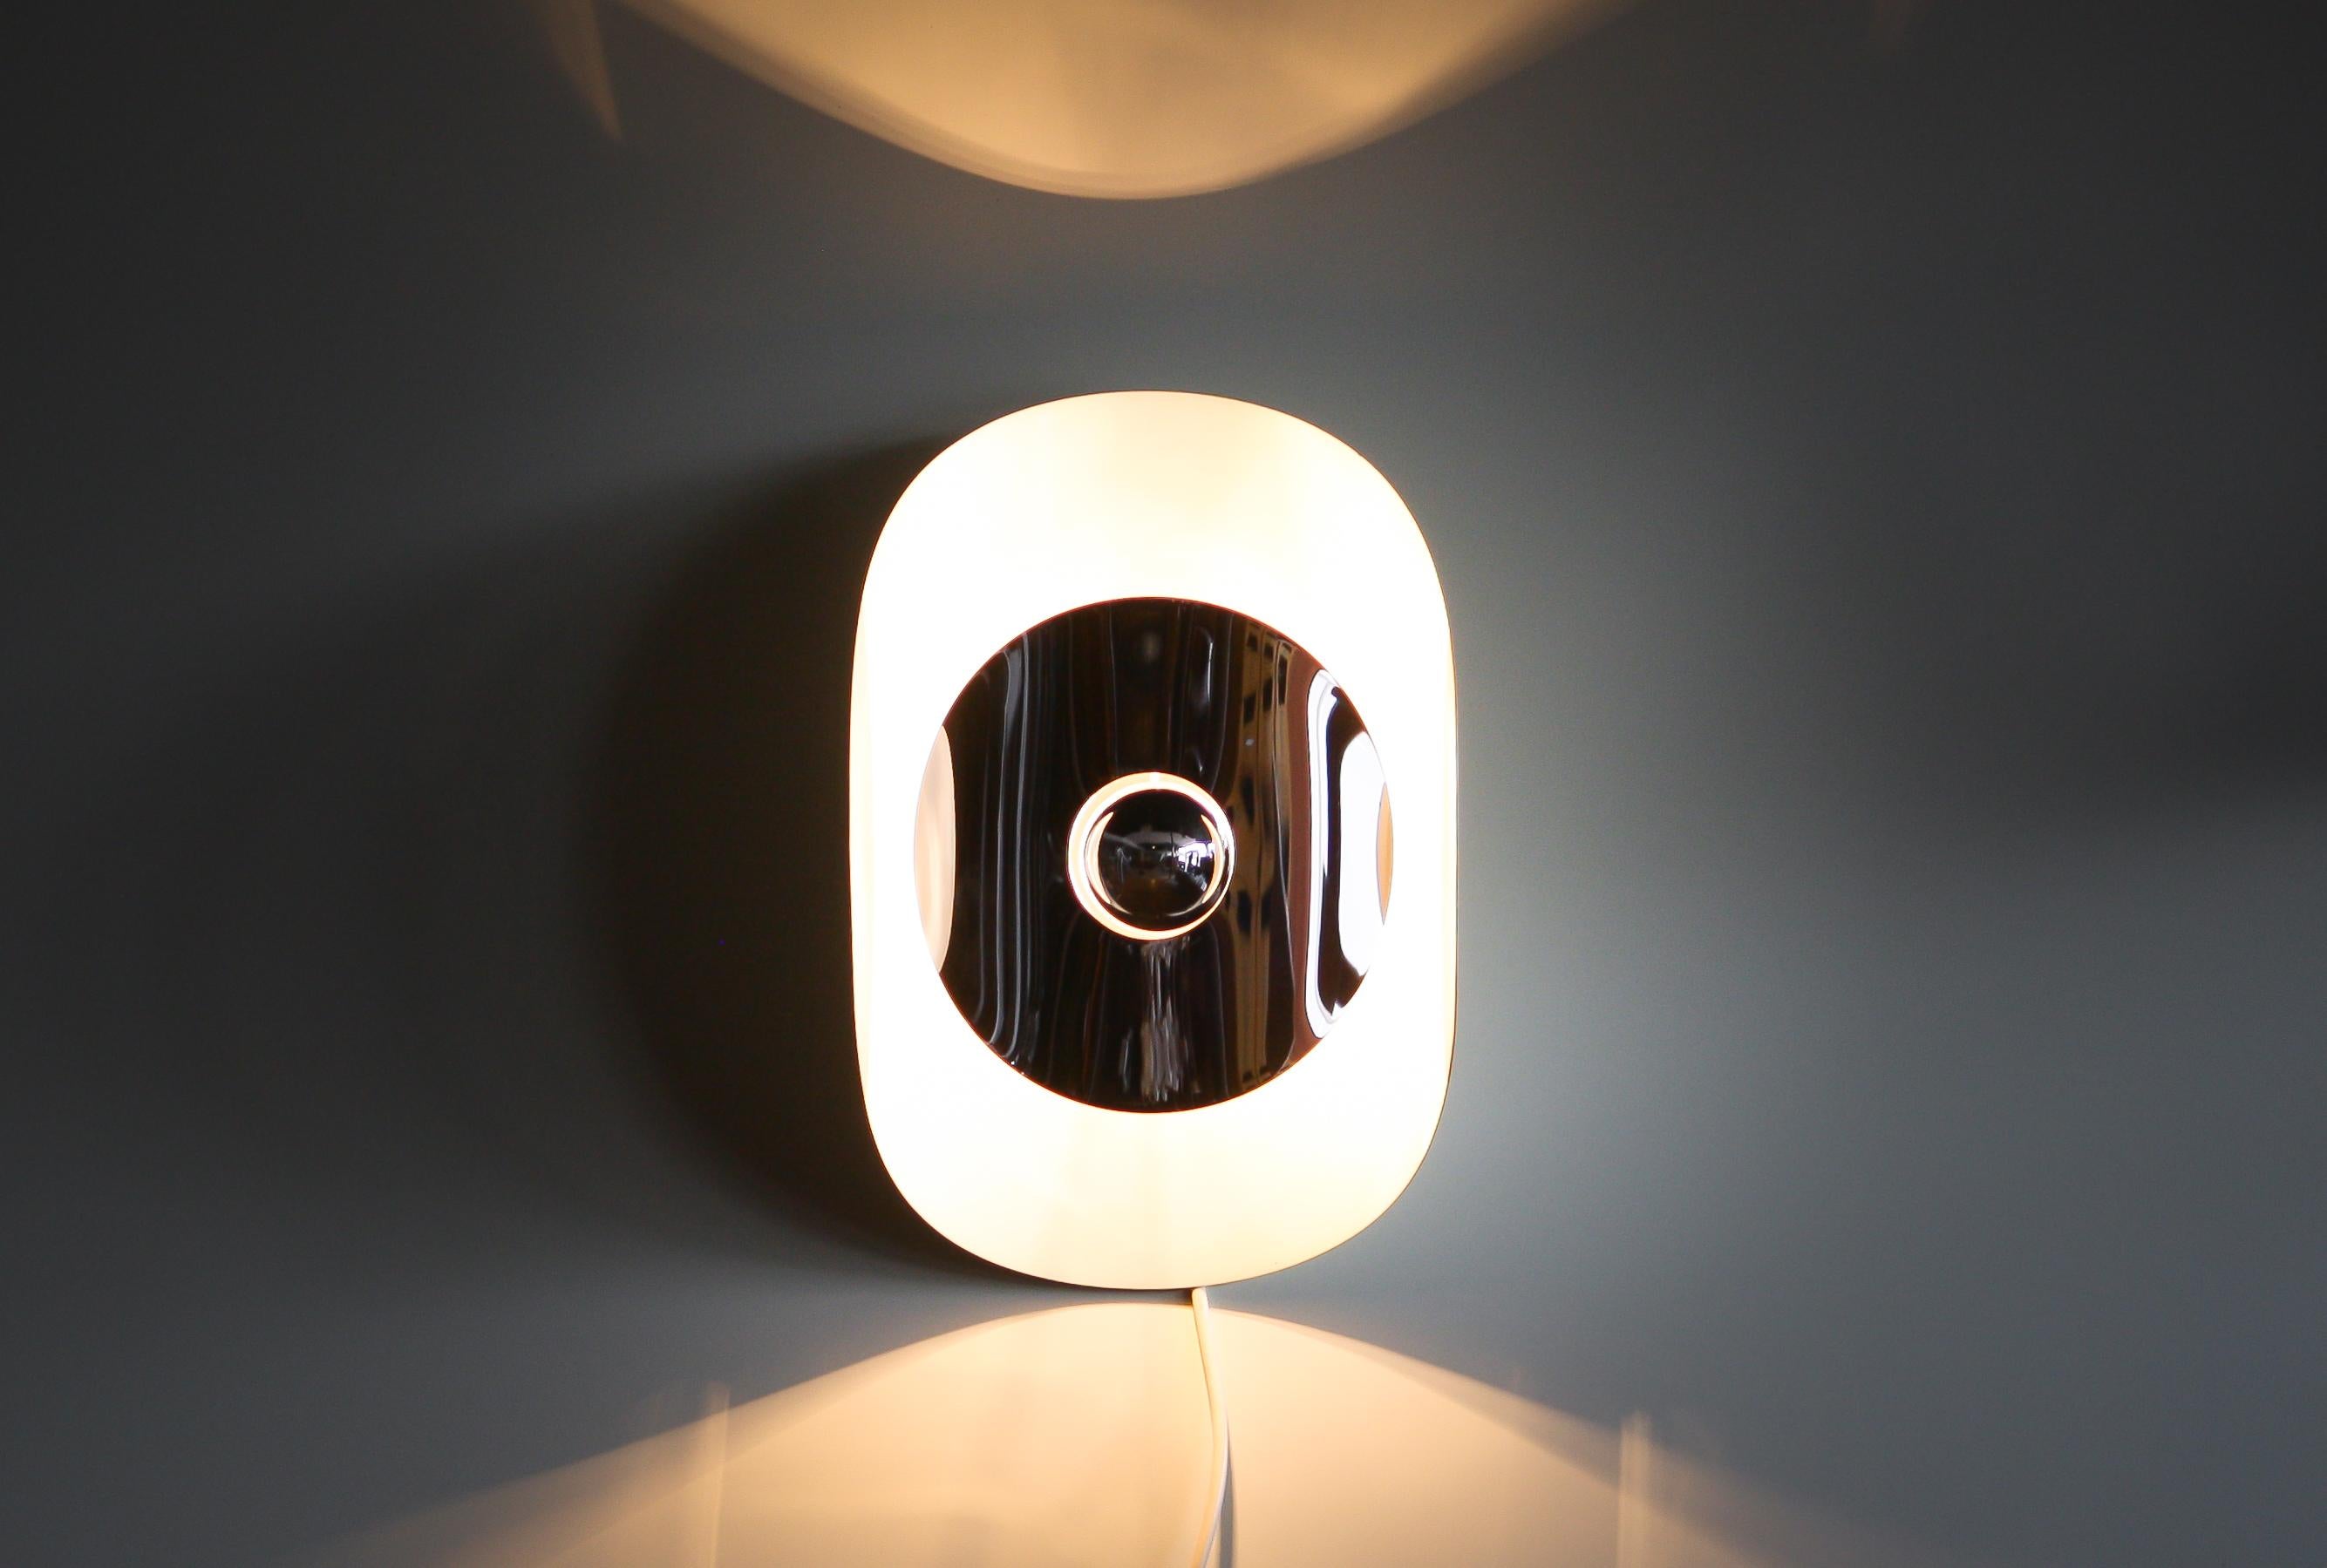 Plated 1970s, Chrome Steel Wall Light by Brevettato, Italy